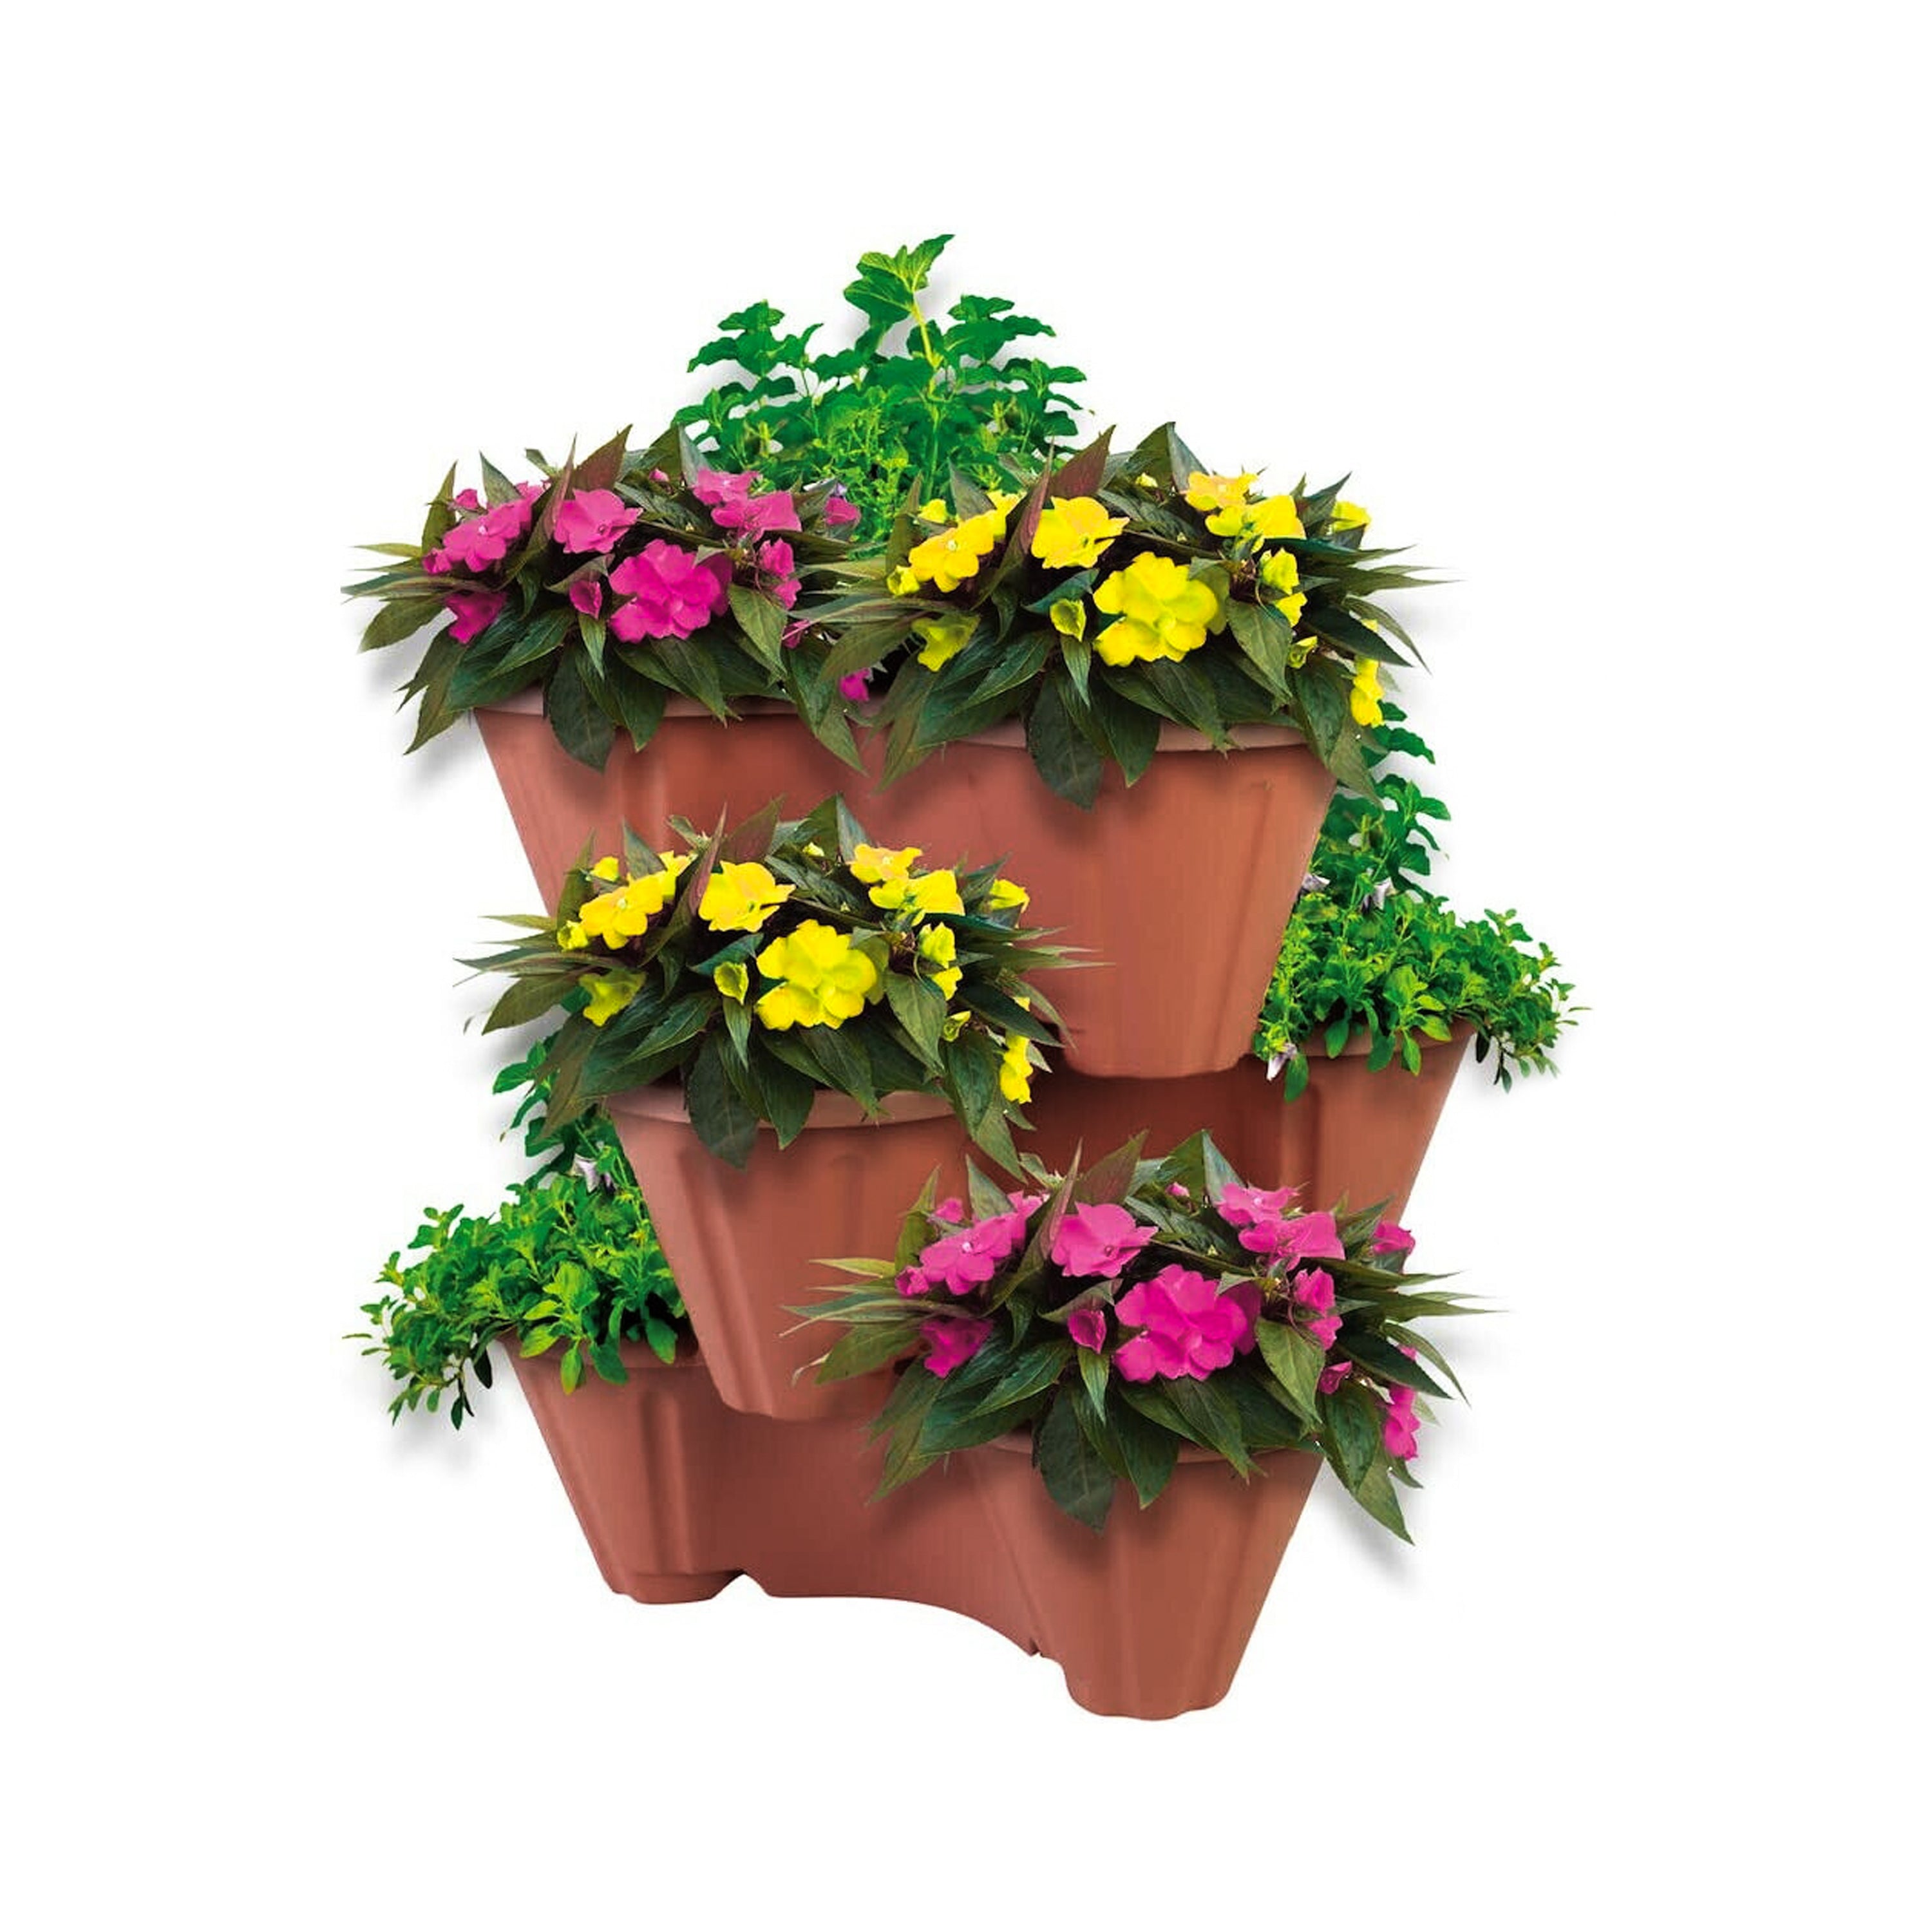 Strawberry/ Herb/ Flower Pot GEEZY - The Magic Toy Shop